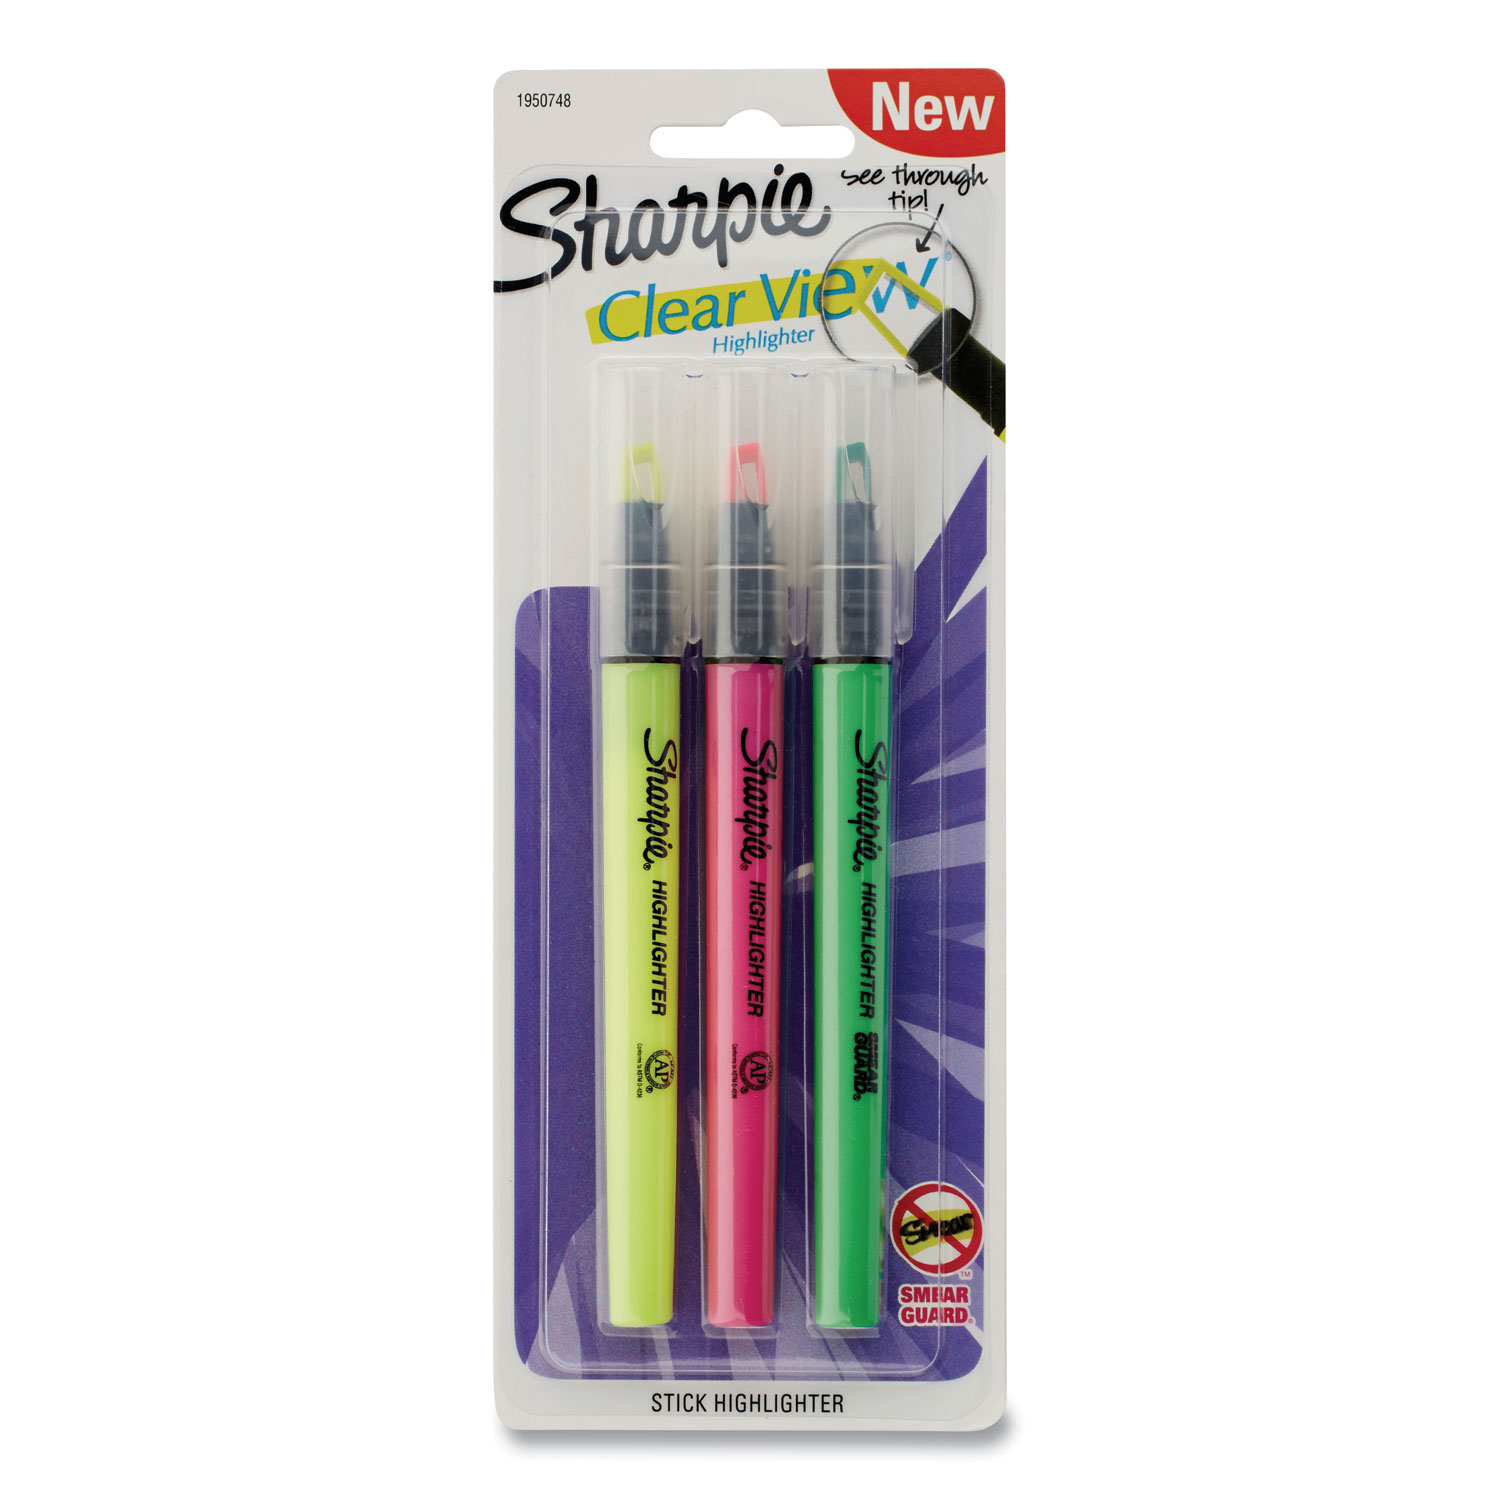 SHARPIE Clear View Highlighters, Chisel Tip, Assorted Colors, 4 Count